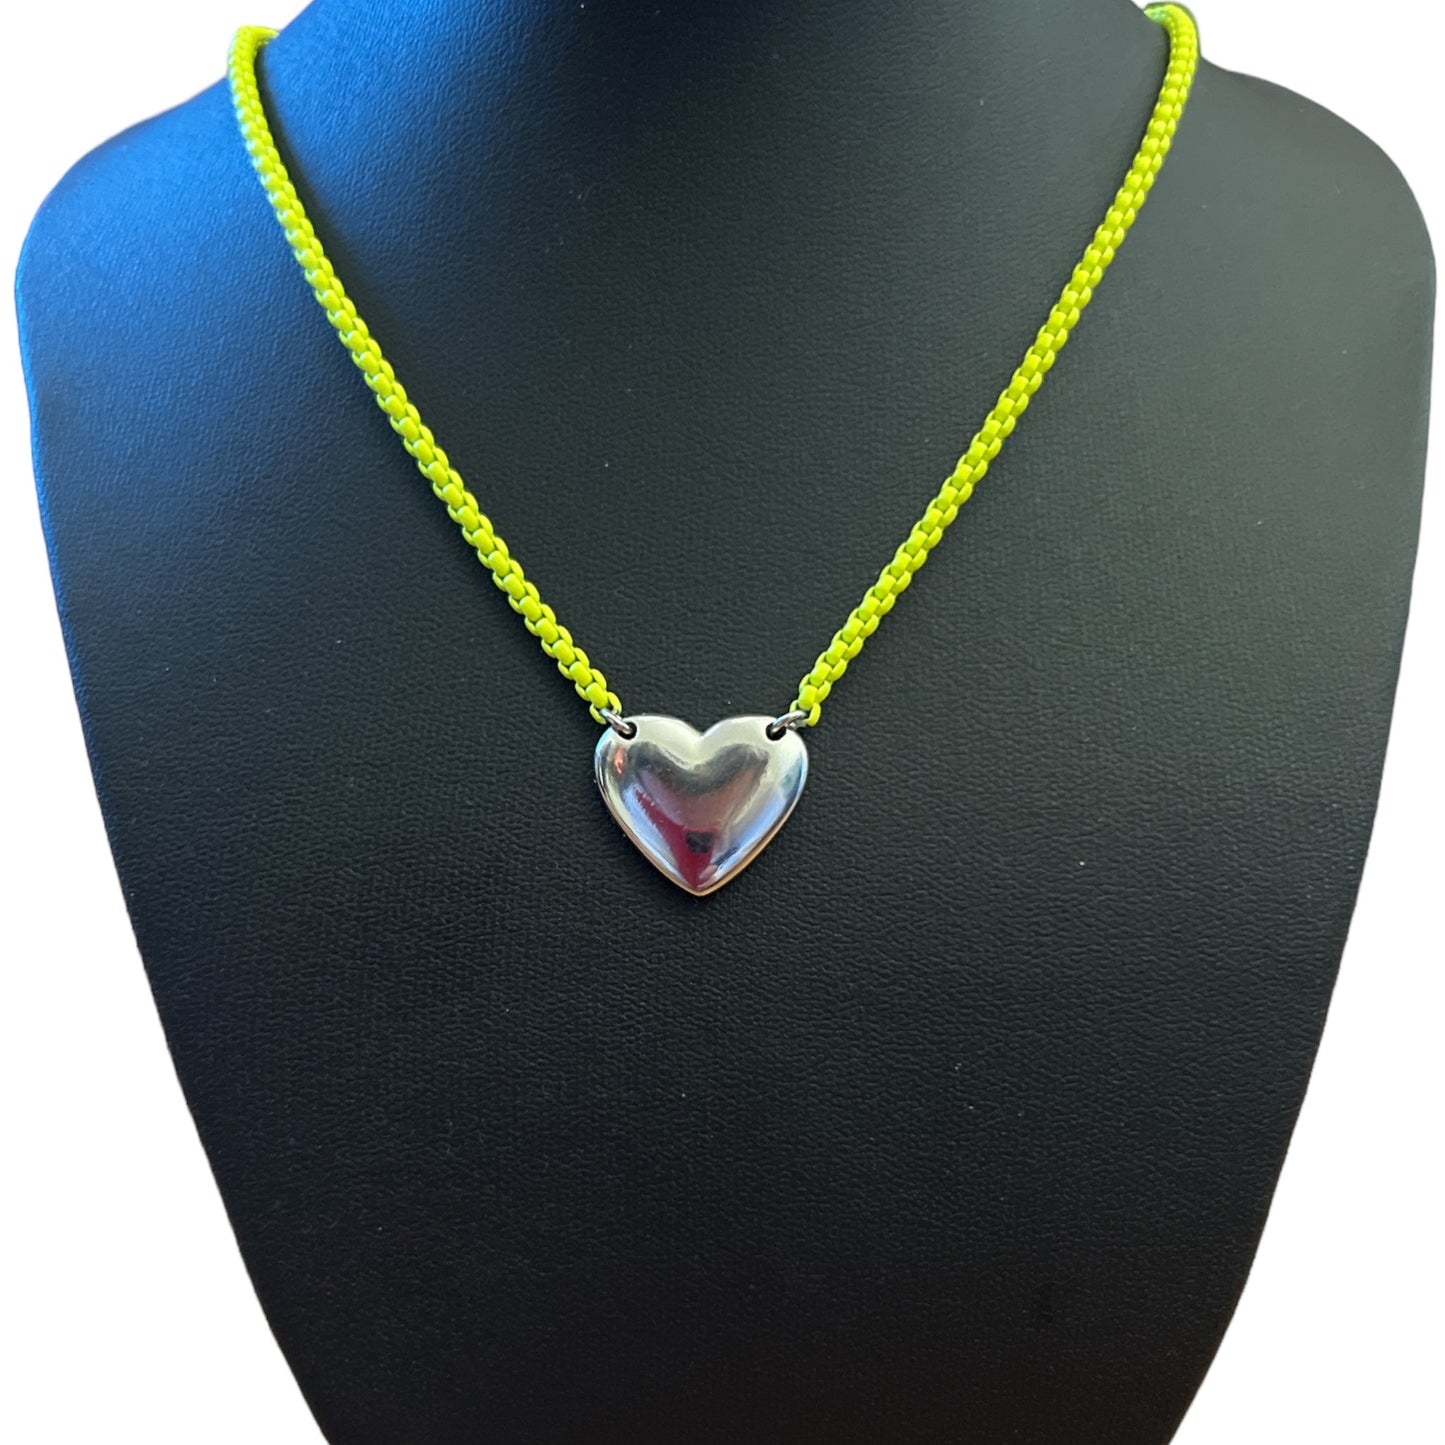 Silver Heart Necklace - Something about Sofia